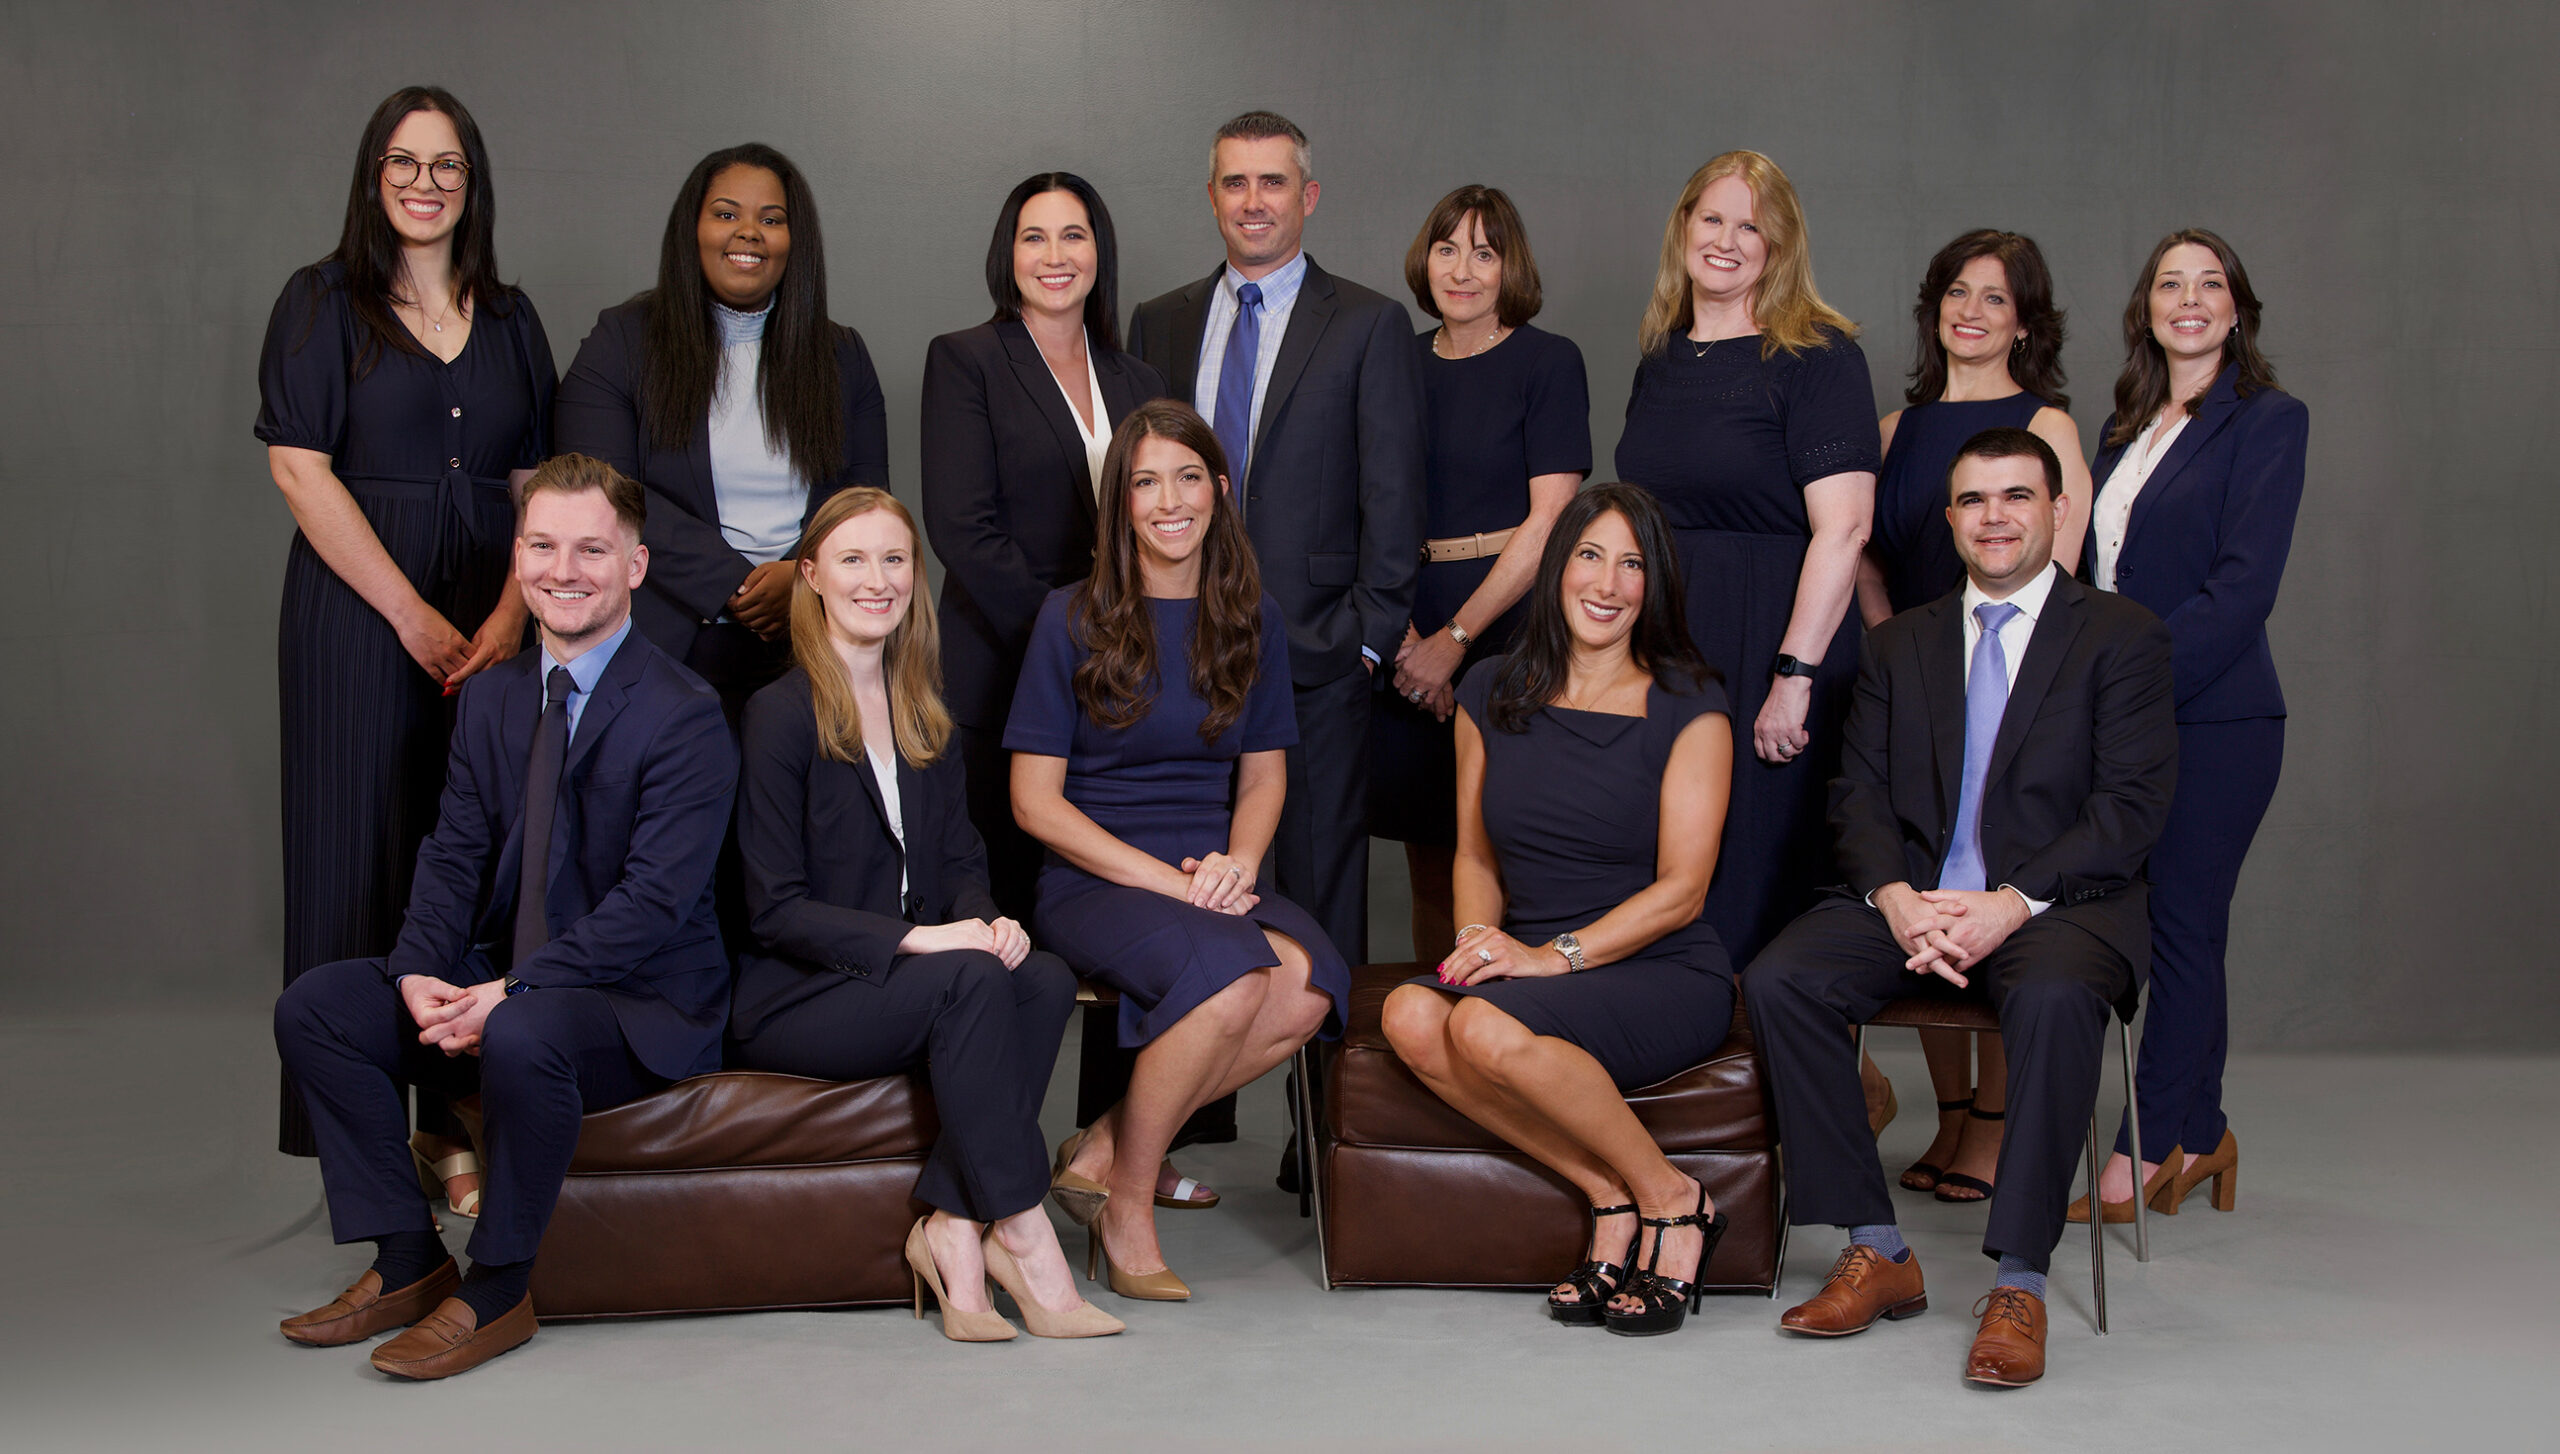 Staff at SG Law Connecticut